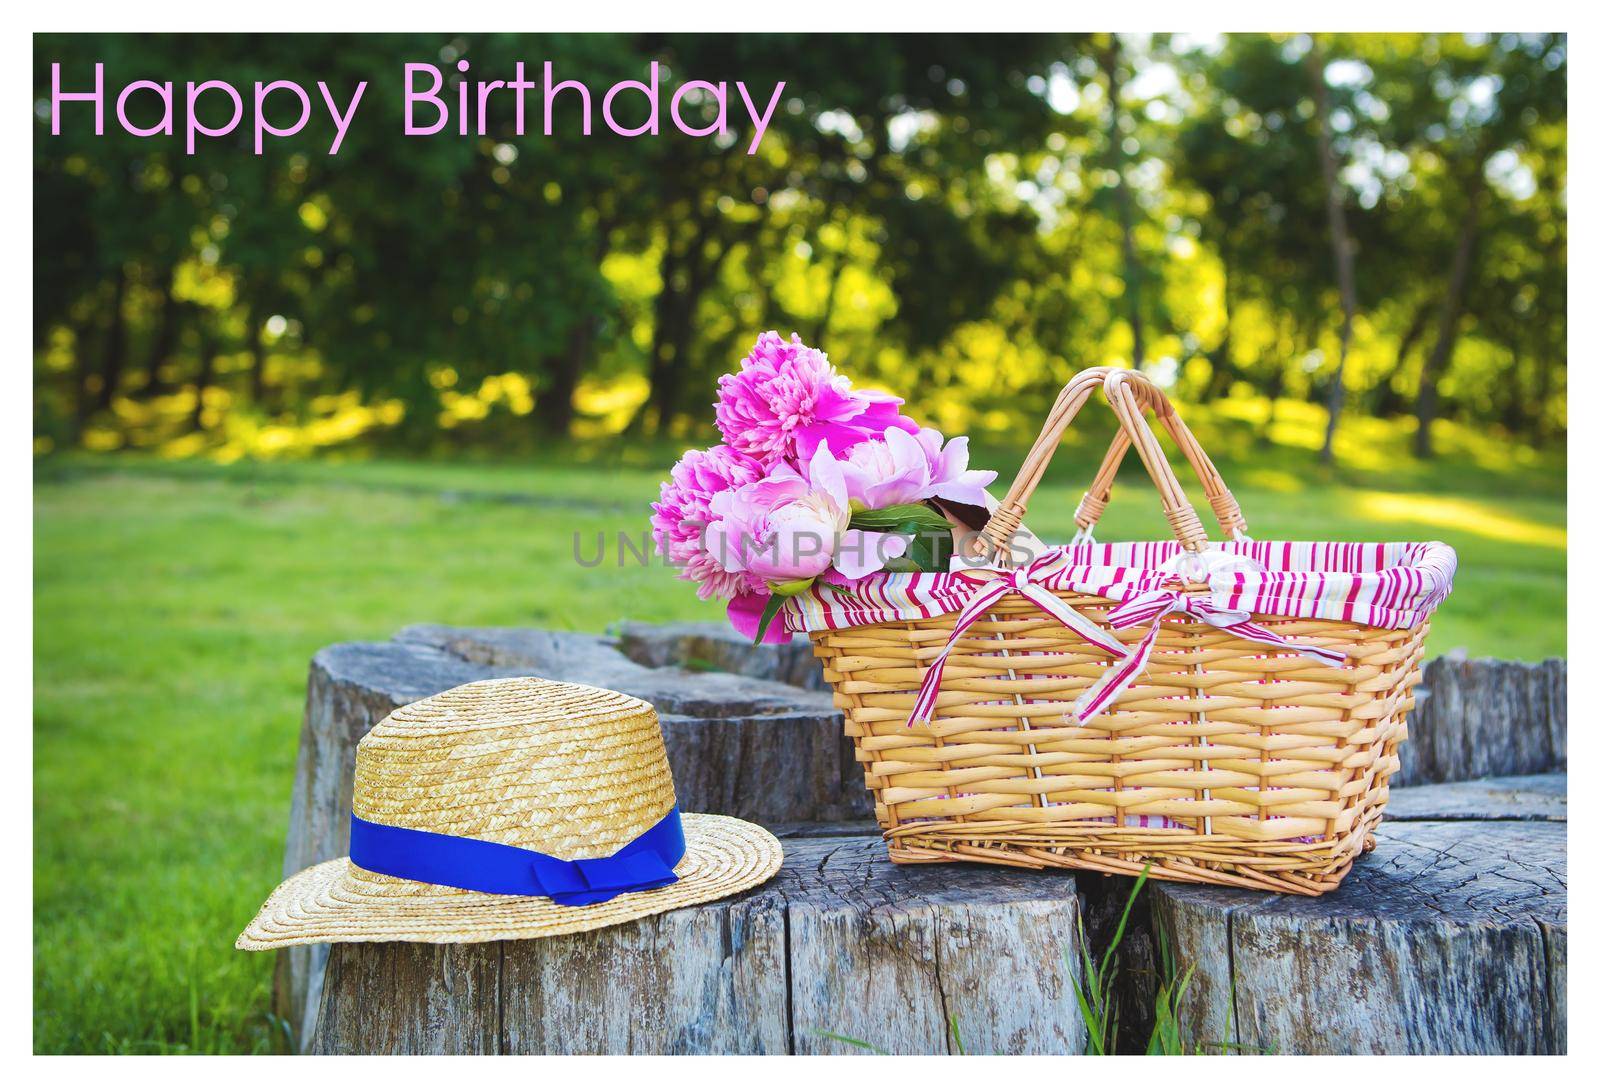 Beautiful straw hat and flowers in a basket stand on a wooden stump-happy birthday inscription